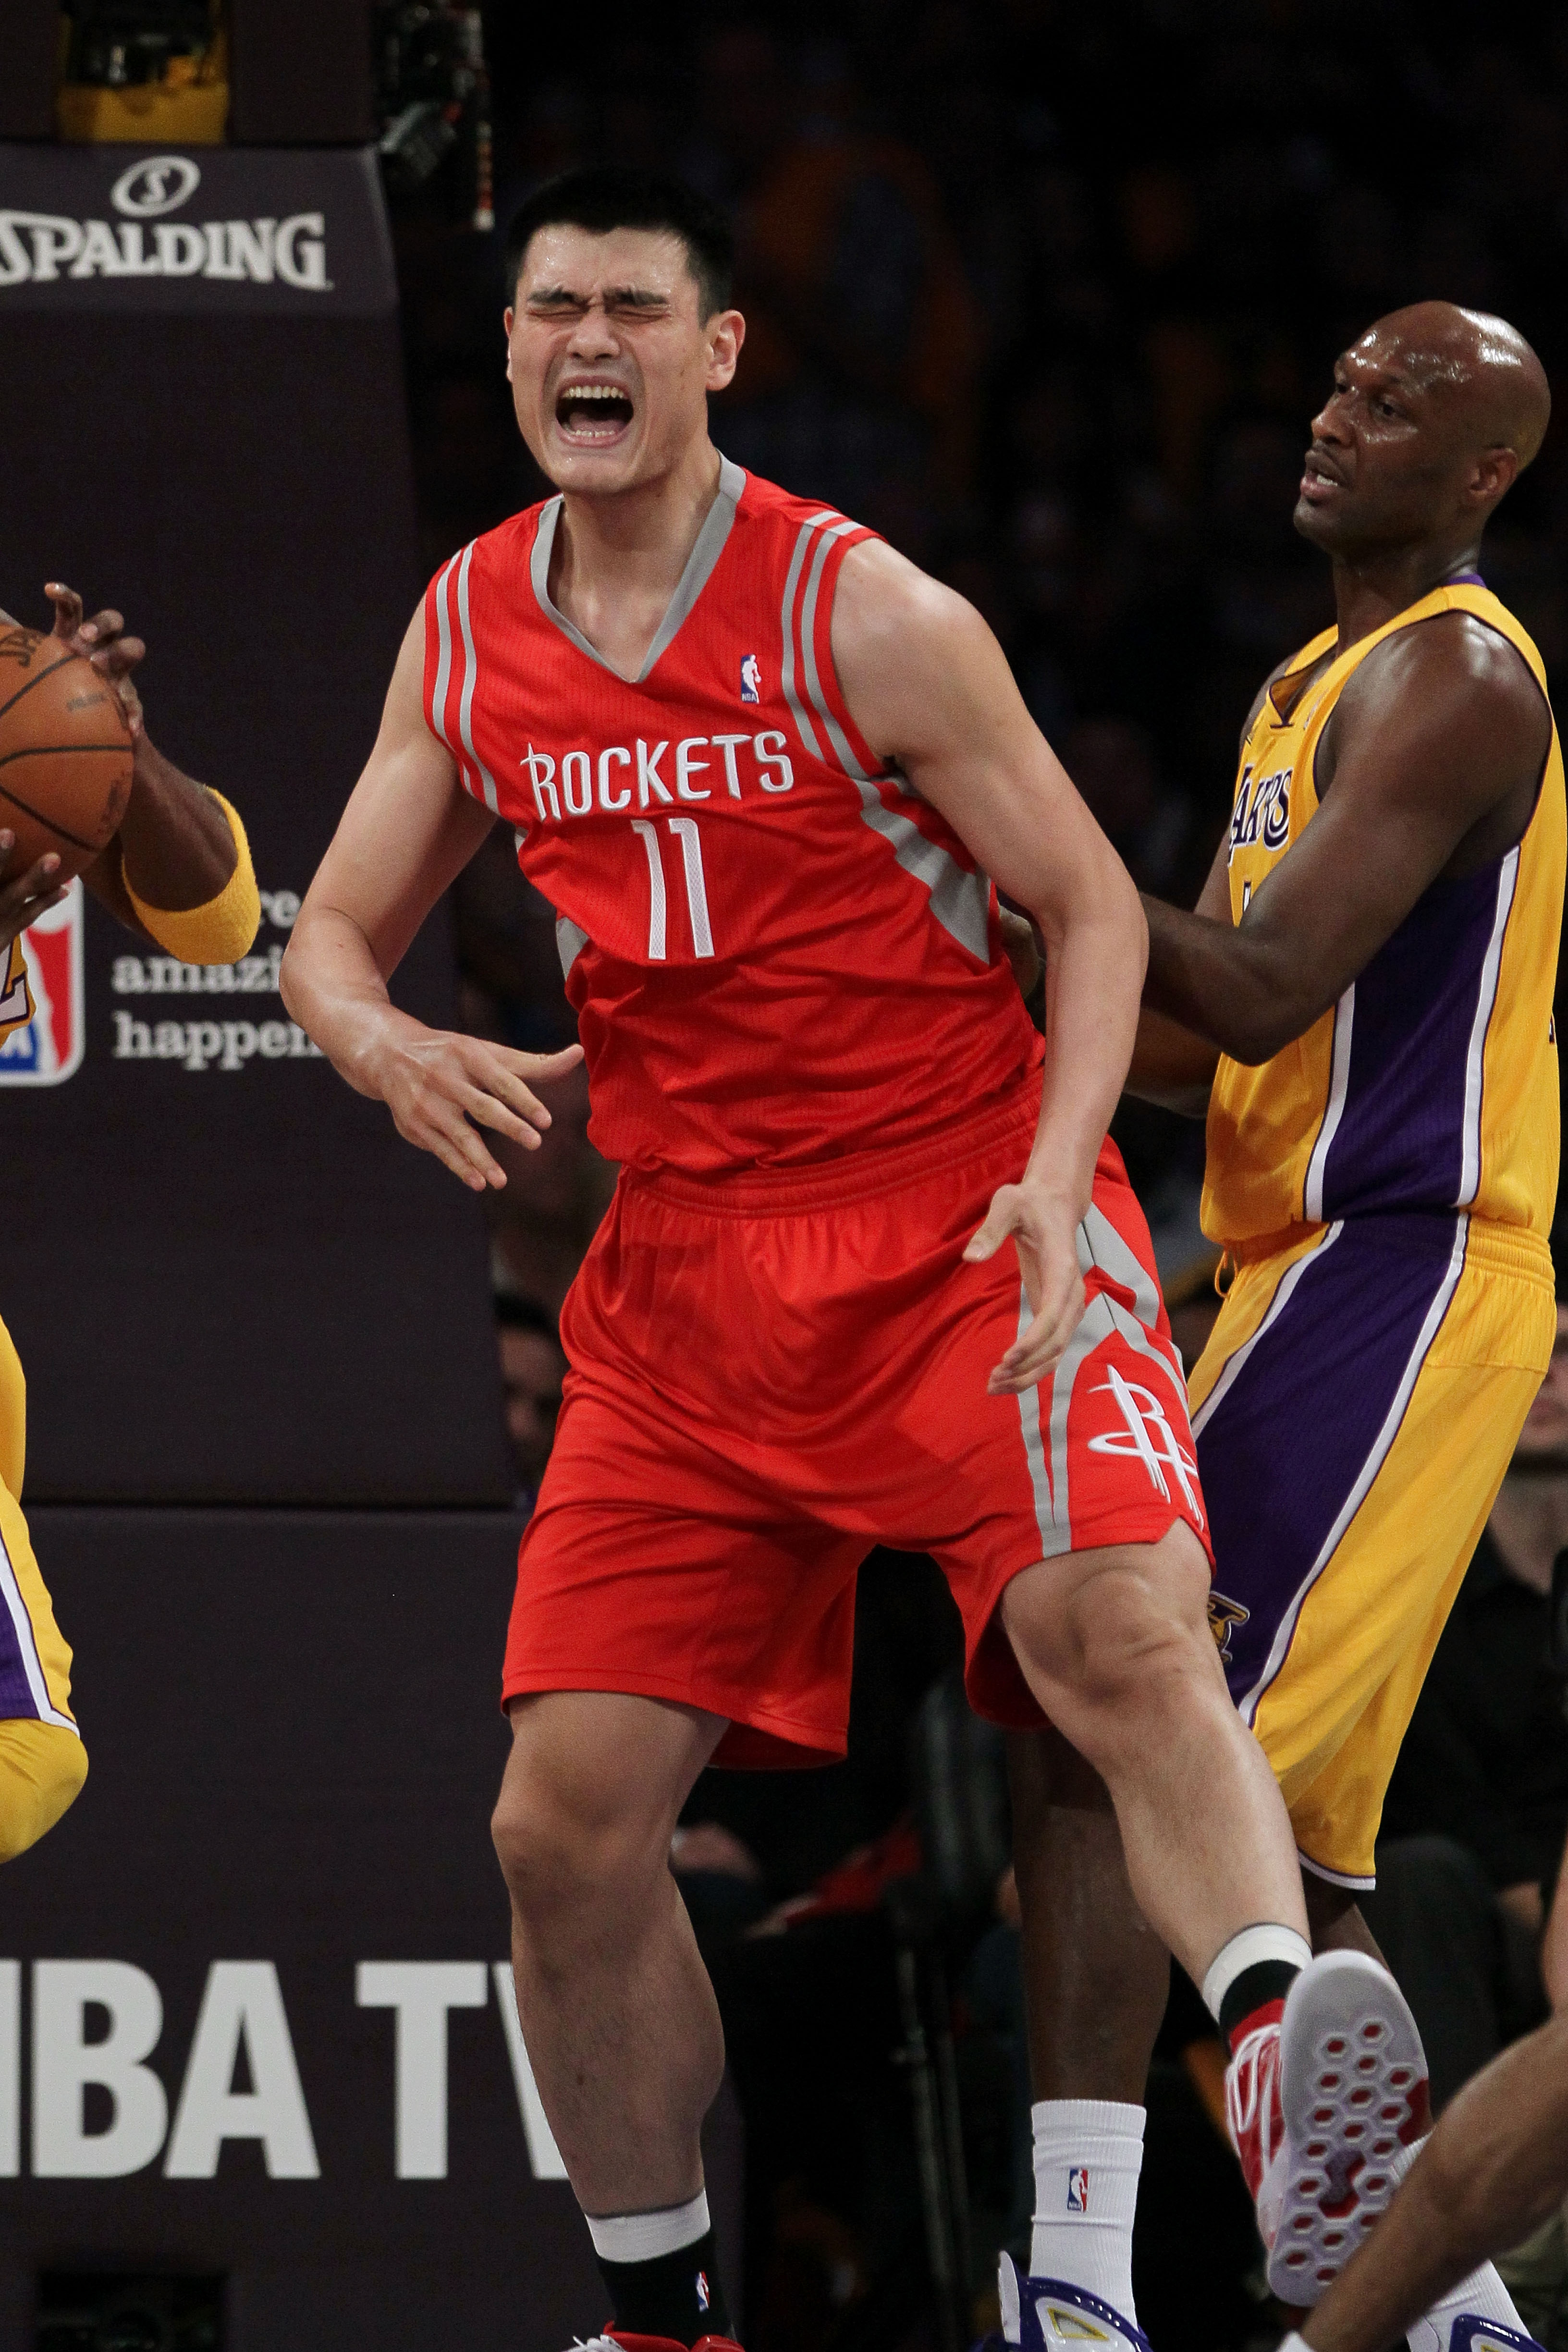 LOS ANGELES, CA - OCTOBER 26:  Yao Ming #11 of the Houston Rockets reacts to a play during their opening night game against the Los Angeles Lakers at Staples Center on October 26, 2010 in Los Angeles, California. NOTE TO USER: User expressly acknowledges